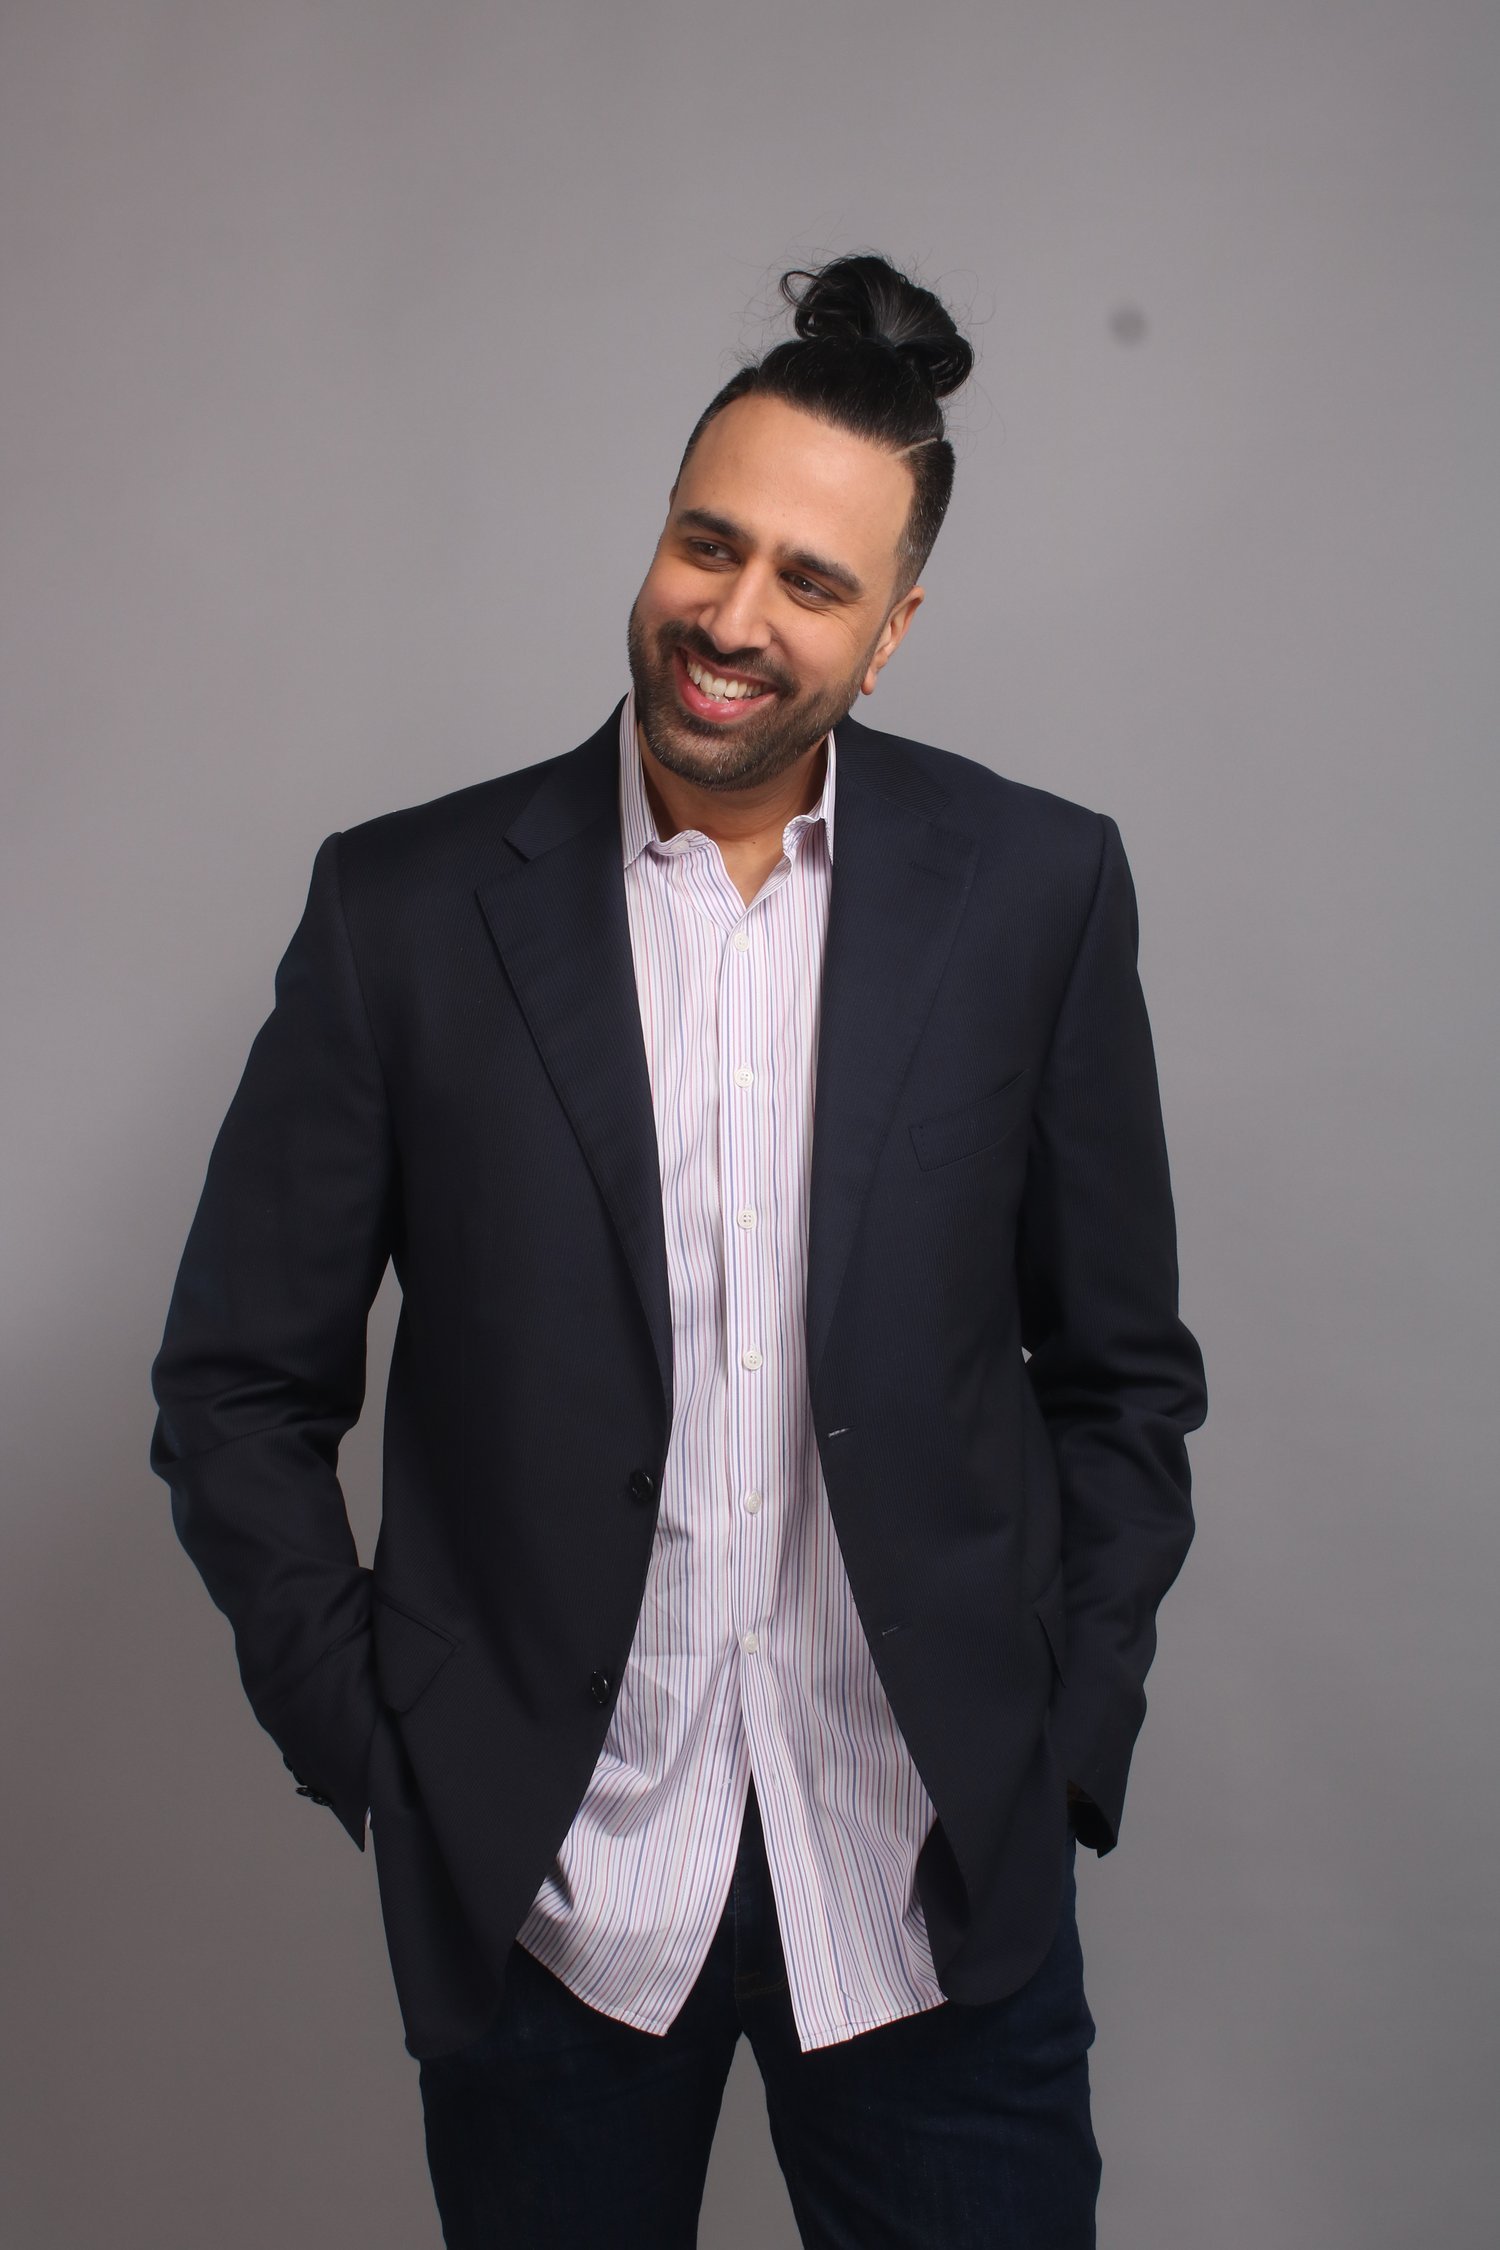 Mike Purewal - Author and Mental Health Advocate